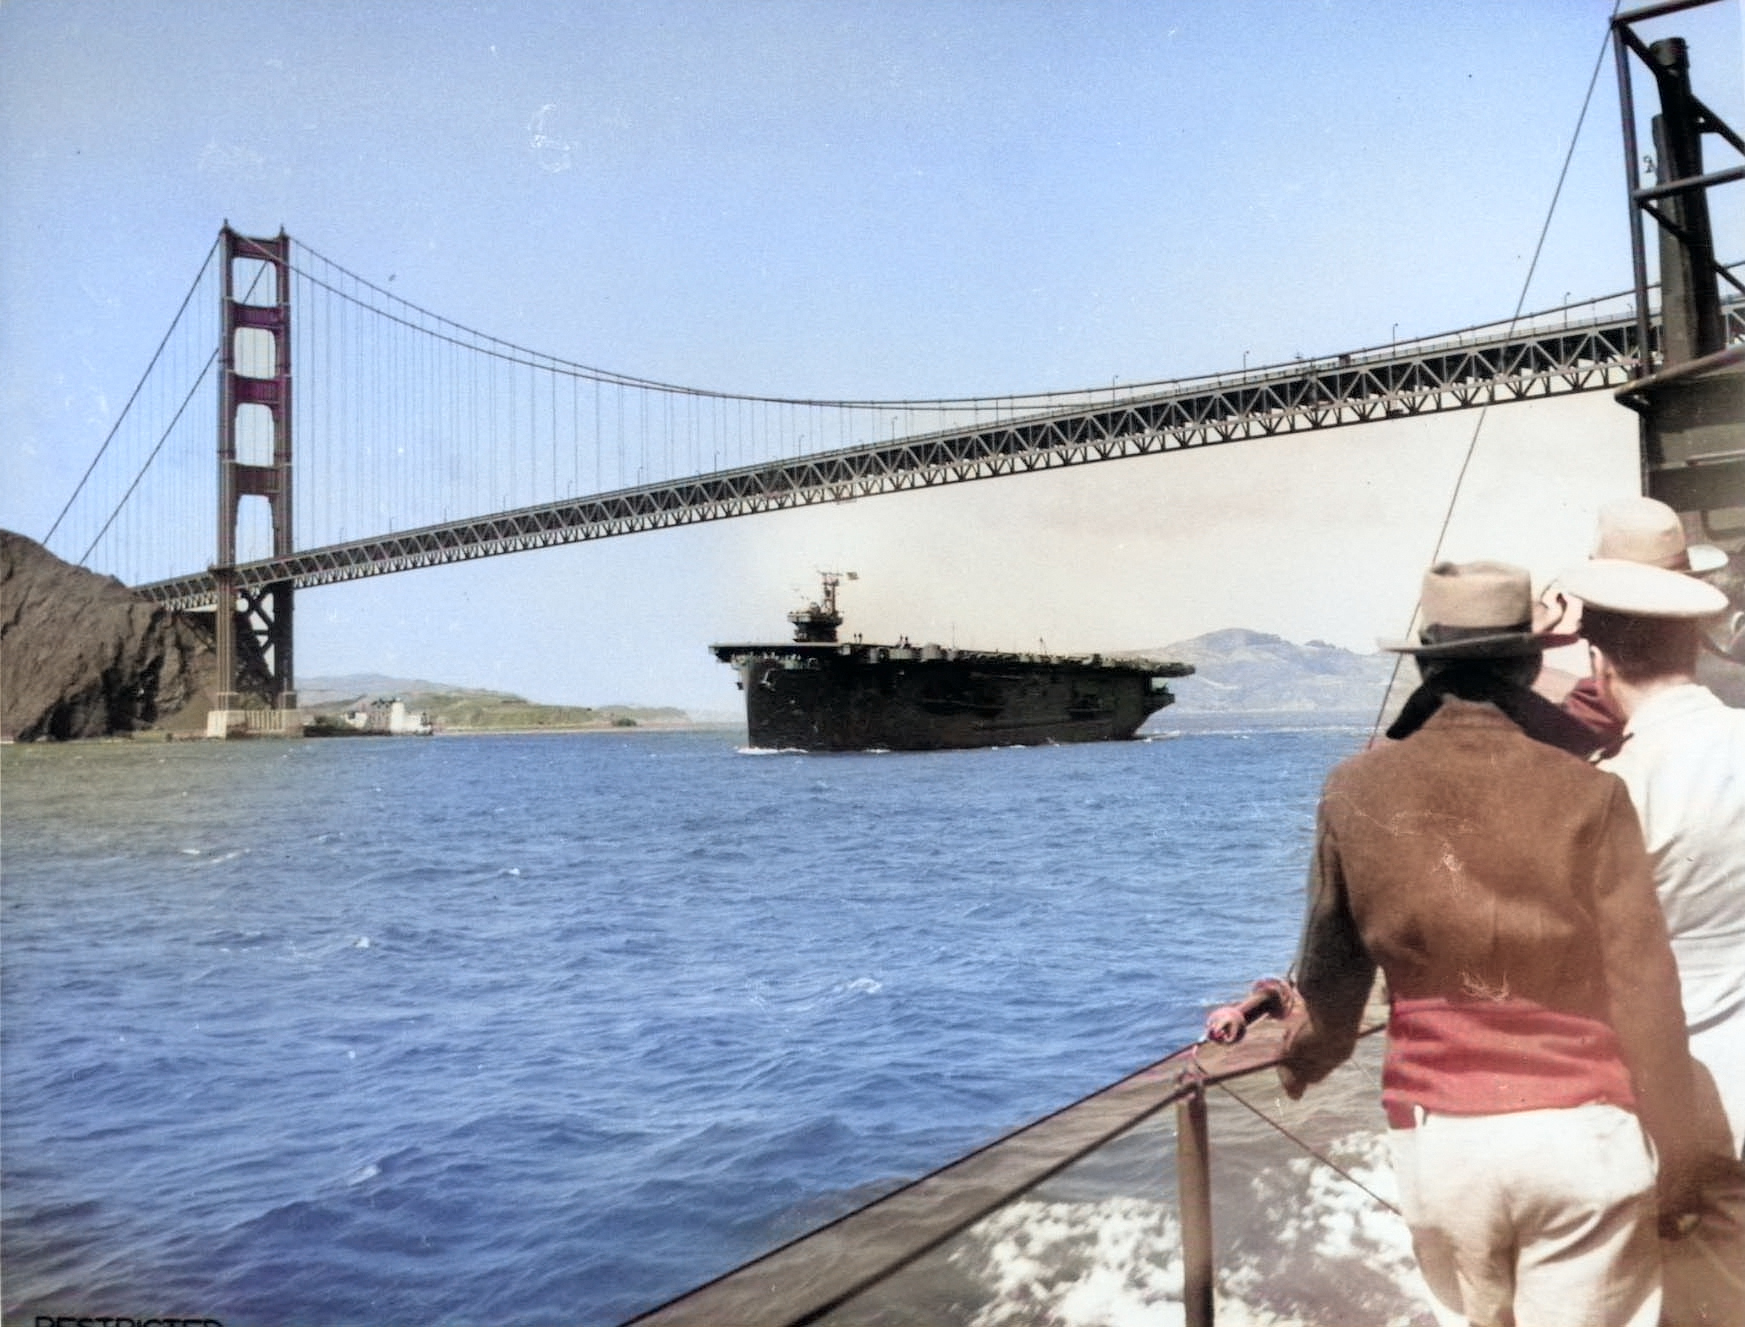 USS Copahee passing under the Golden Gate Bridge, San Francisco Bay, California, United States, 15 Jul 1943 [Colorized by WW2DB]